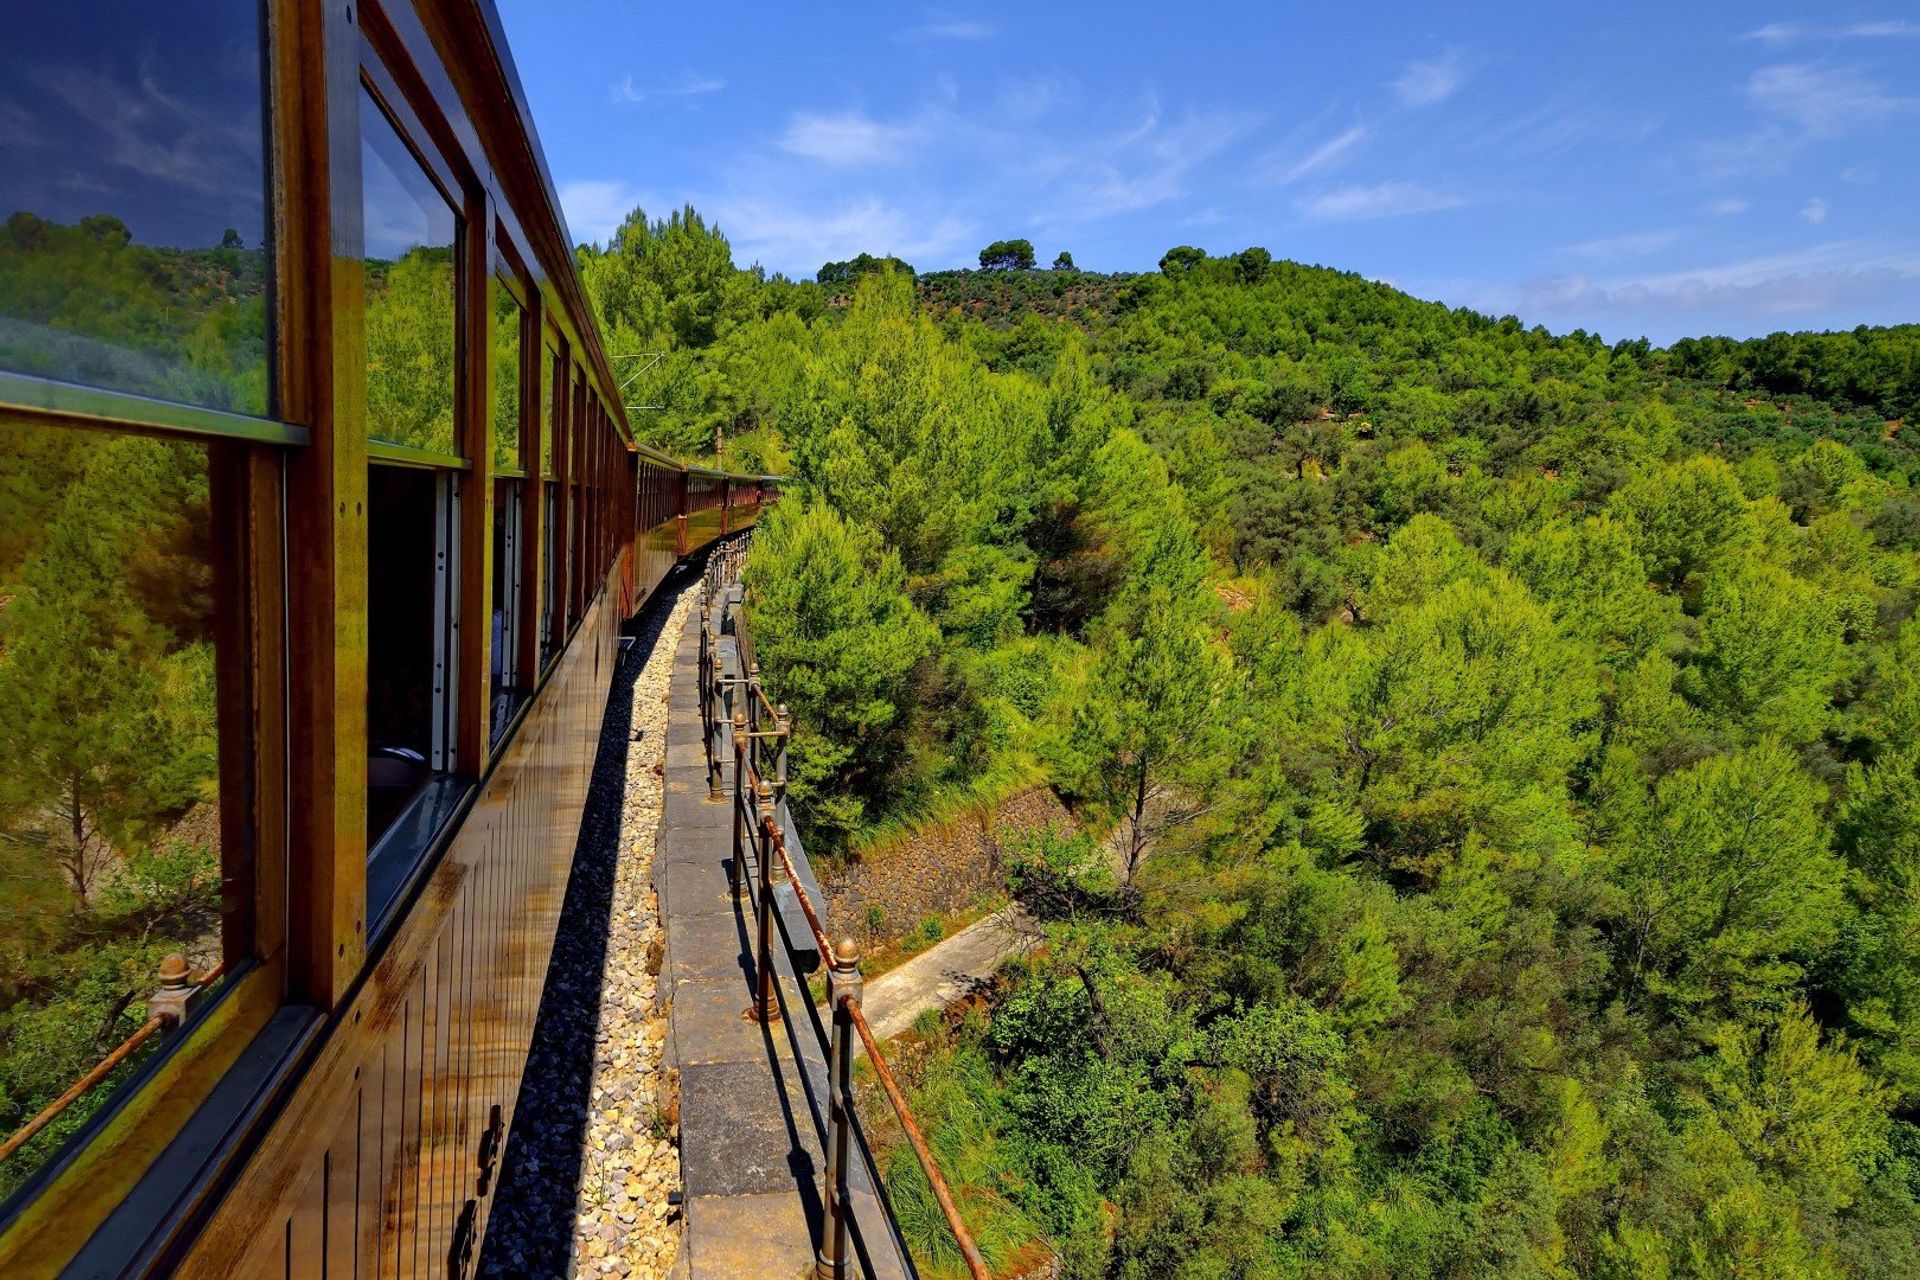 The scenic railway journey from Sóller to Palma